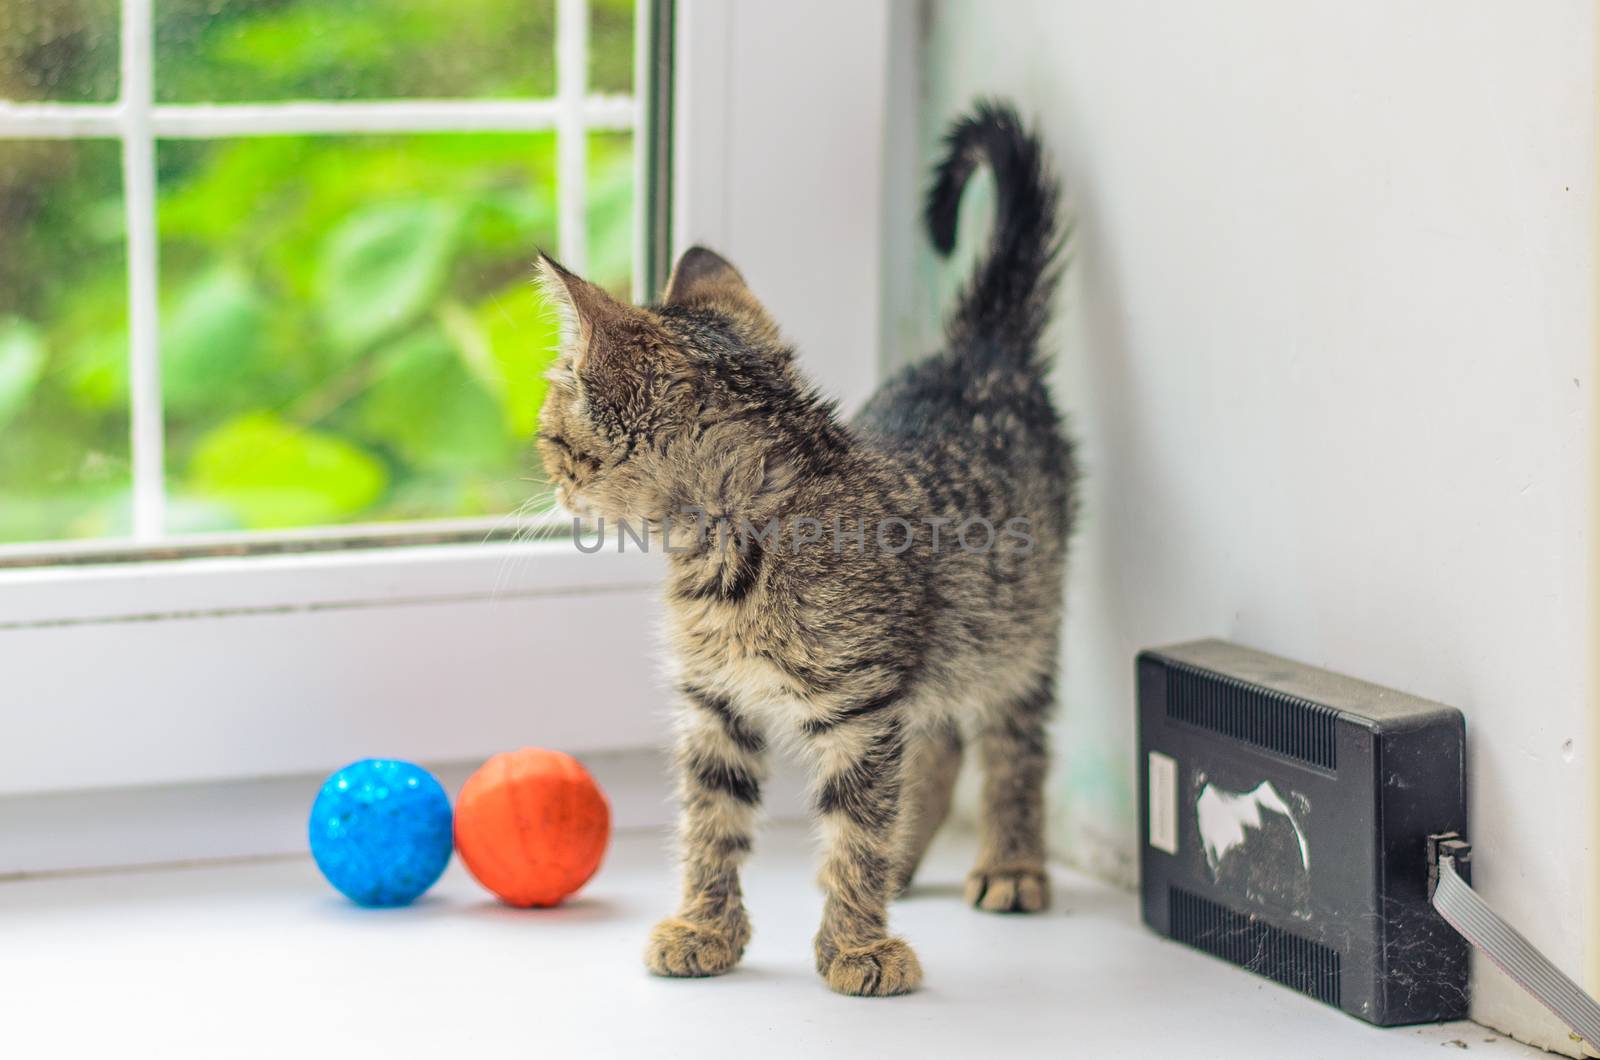 Gray kitten looks out the window near the blue and orange balls